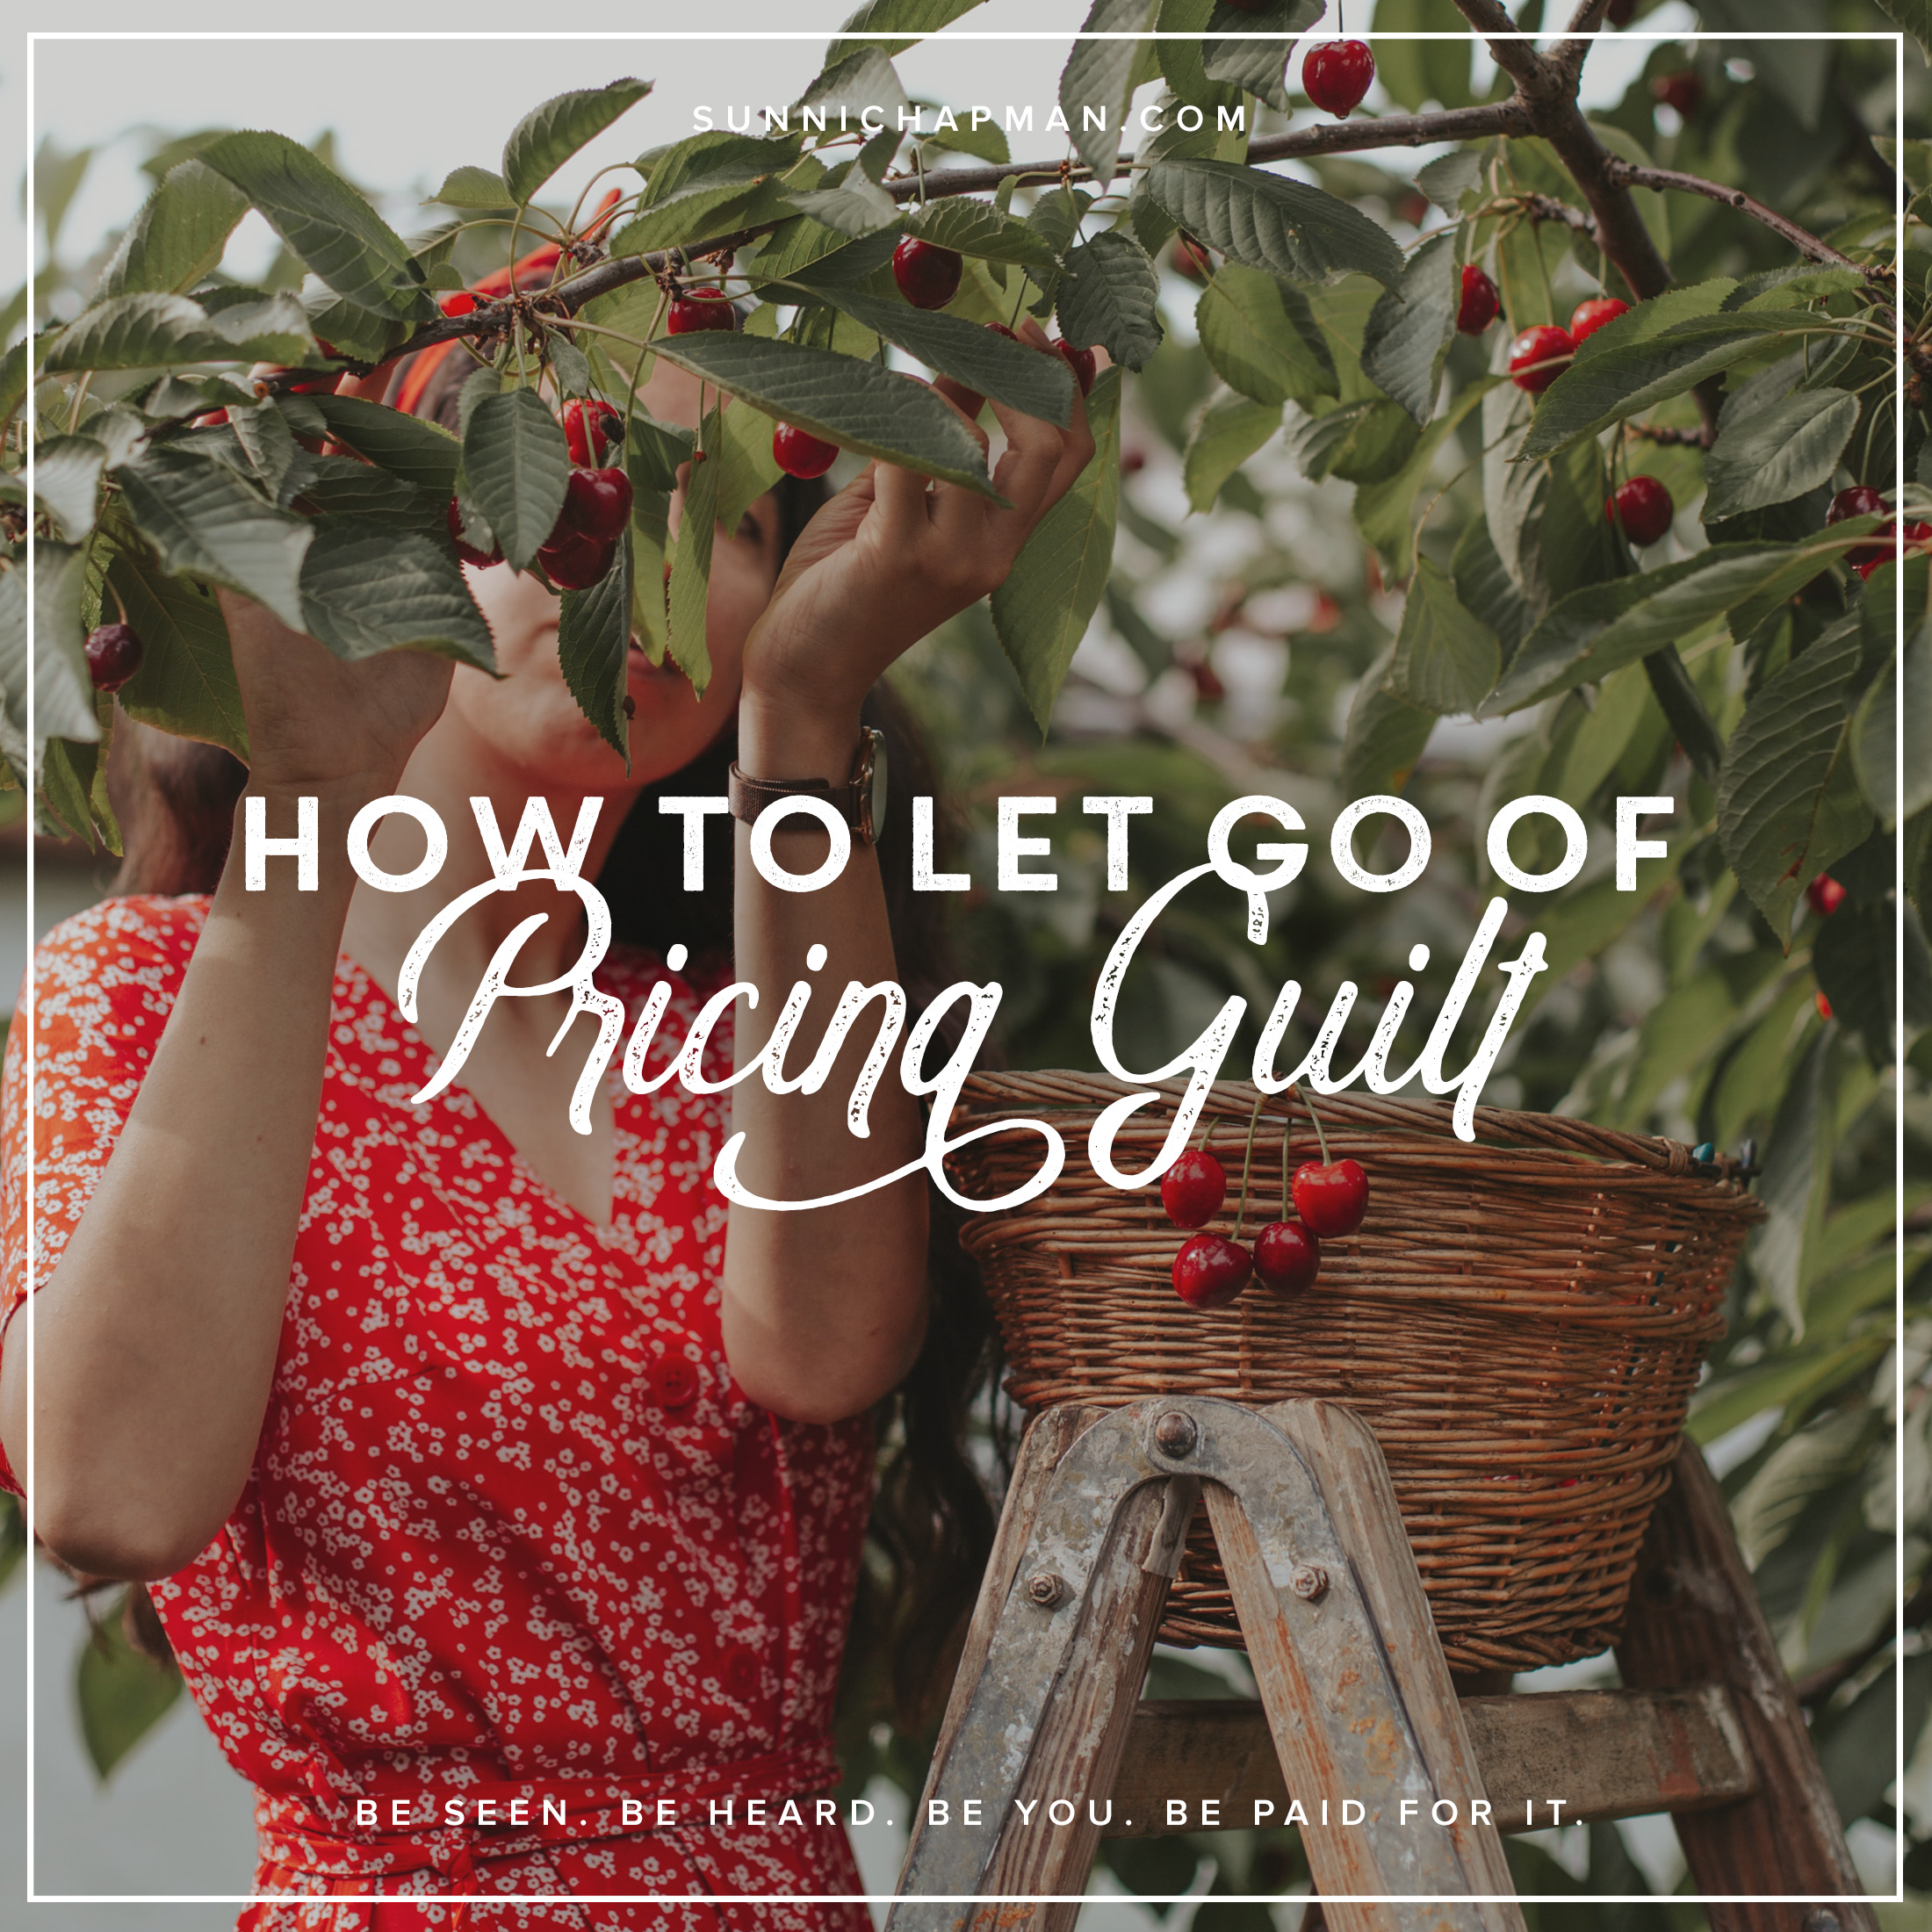 Woman picking cherries and text How To Let Go Of Pricing Guilt